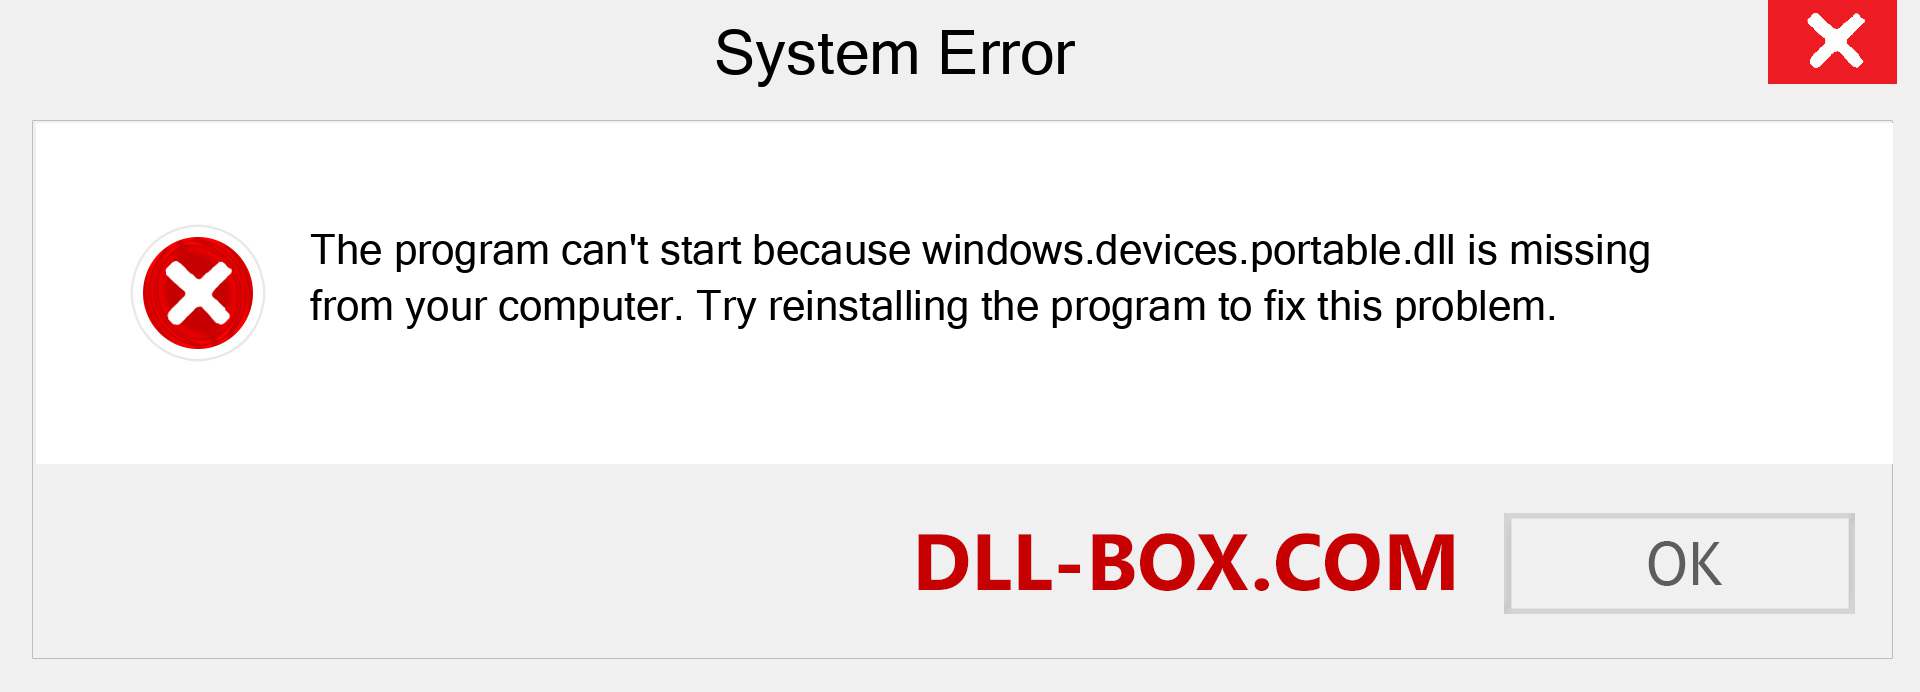  windows.devices.portable.dll file is missing?. Download for Windows 7, 8, 10 - Fix  windows.devices.portable dll Missing Error on Windows, photos, images